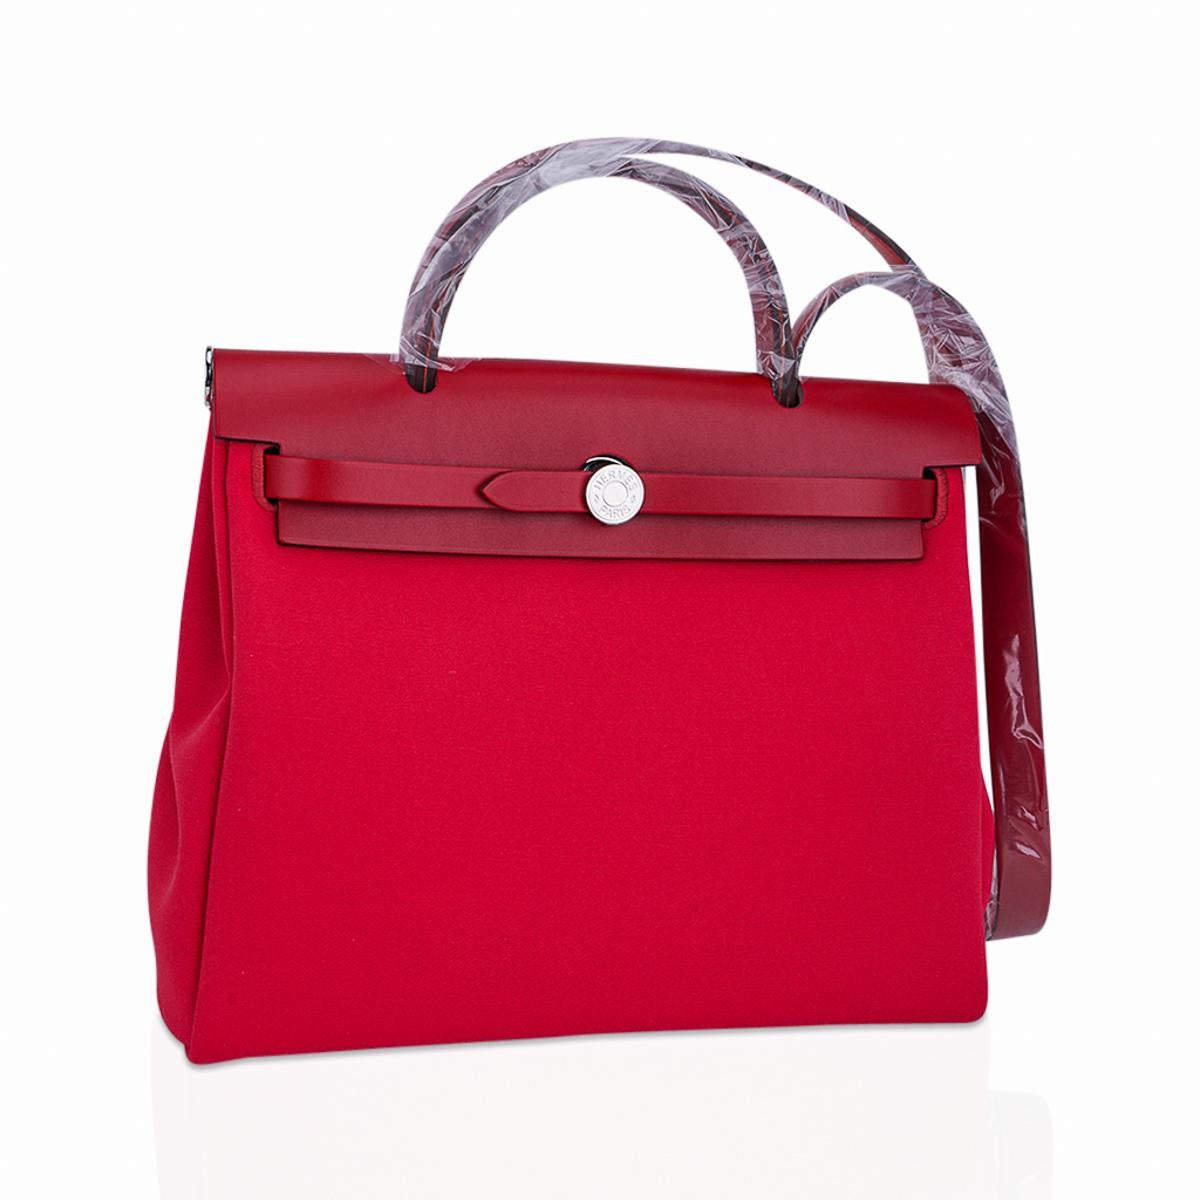 Mightychic offers an Hermes Herbag Zip 31 tri-colored bag in Rose Extreme Toile Officier and Rouge Piment Vache Hunter leather.
Rear has an exterior toile Rouge Venetian canvas zip pocket and a matching interior removable pochette.
Beautiful rich